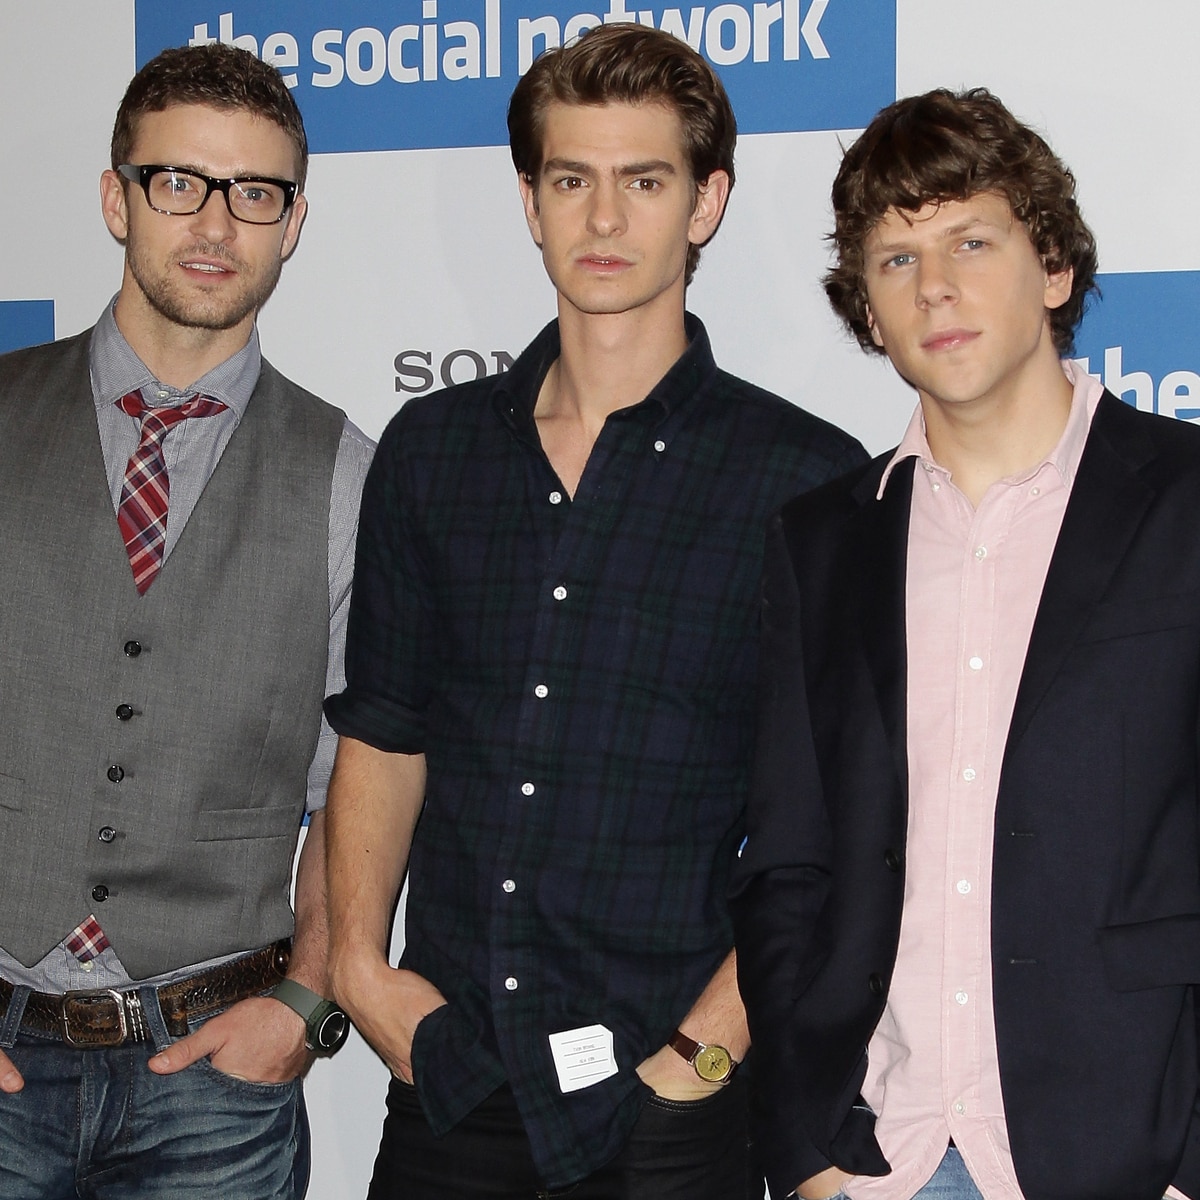 Status Update: There’s a Social Network Sequel in the Works